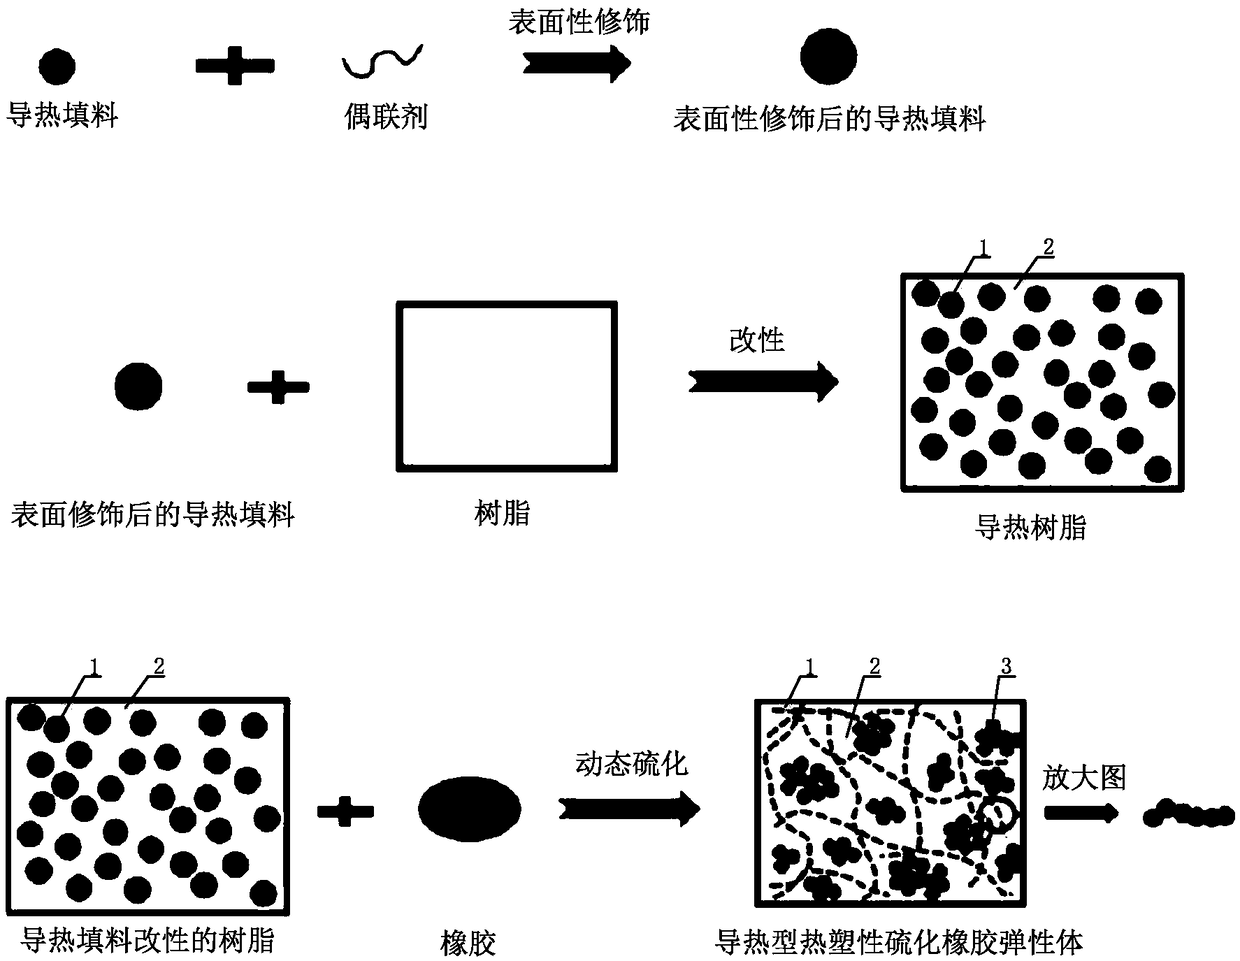 Preparation method and product of heat-conductive thermoplastic vulcanized rubber elastomer material